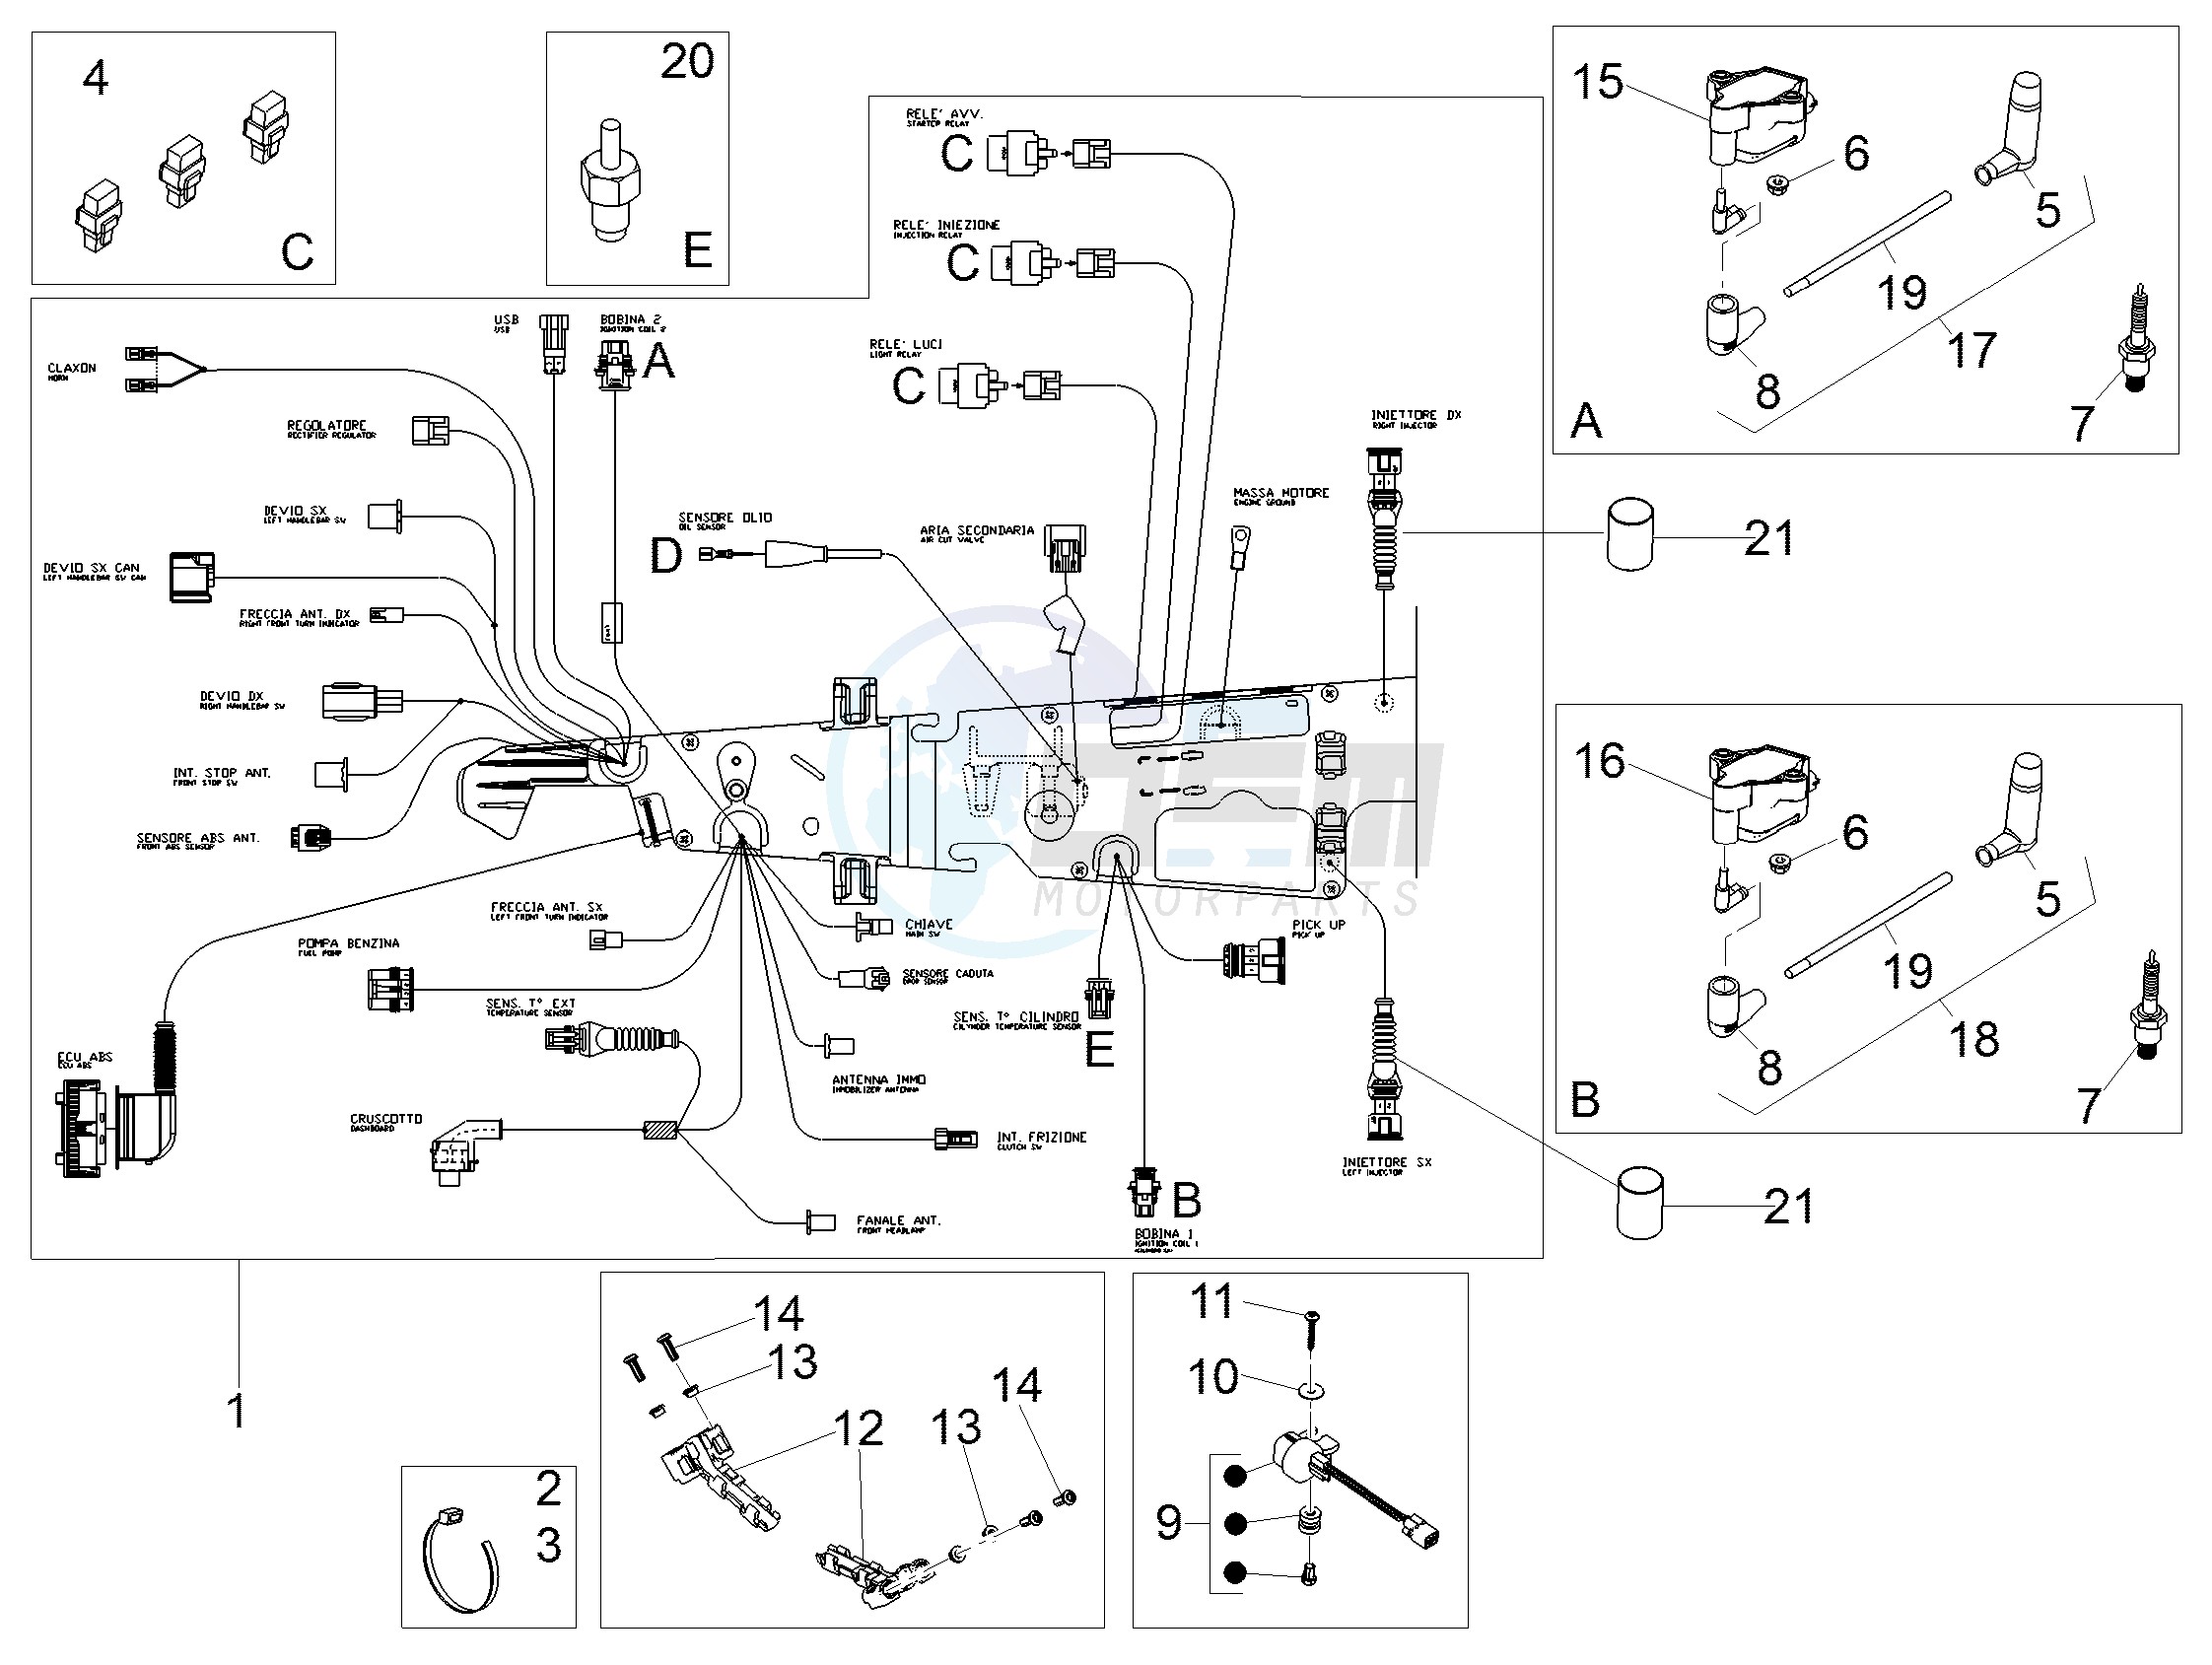 Central electrical system blueprint